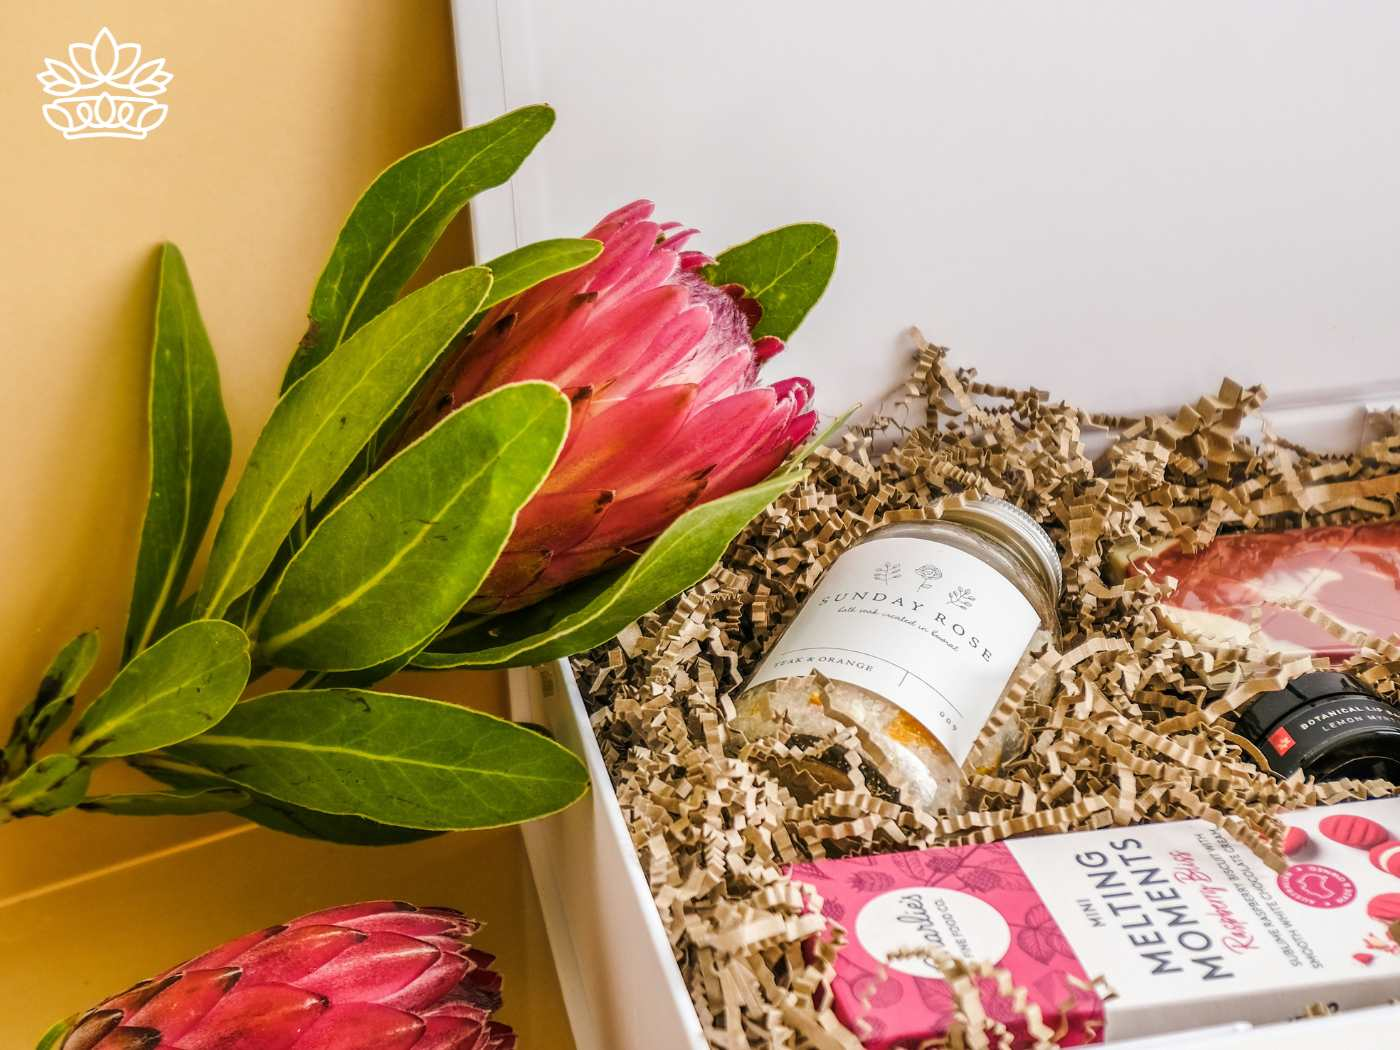 A beautifully arranged gift hamper containing protea flowers, bath salts, and chocolates, representing the Gift Boxes for Her Collection - Perfect for friends - Fabulous Flowers and Gifts